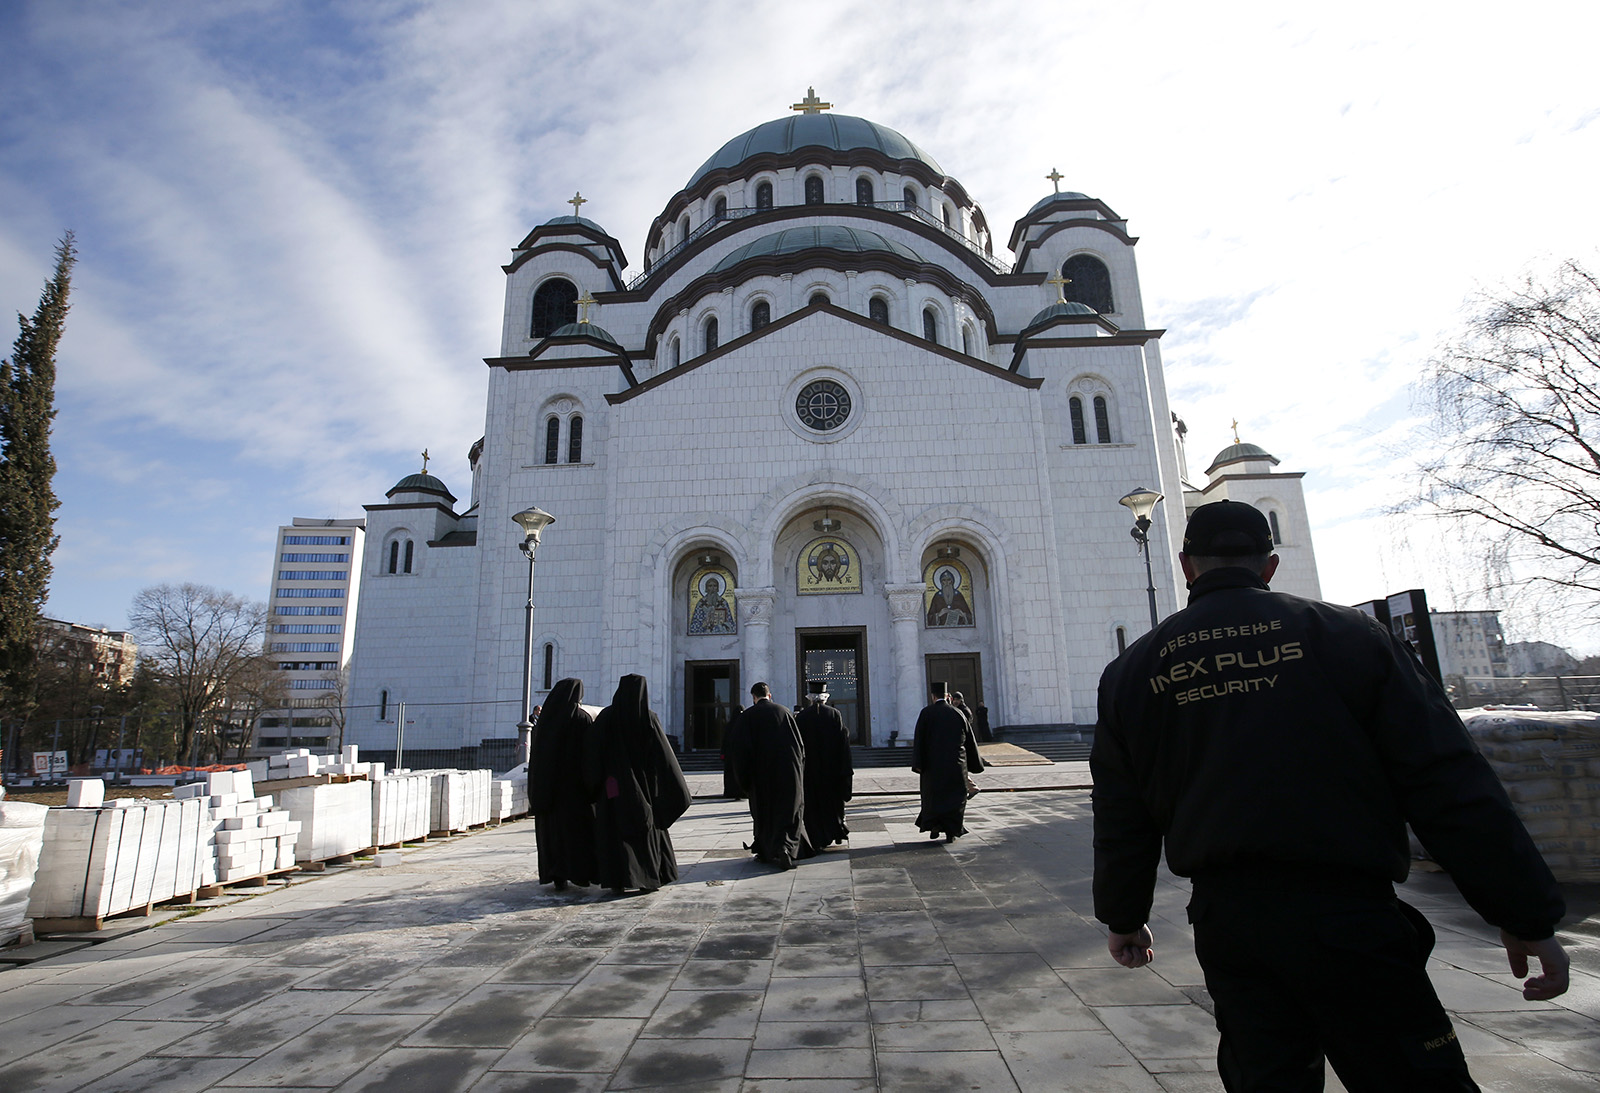 Serbian Orthodox Church bishops arrive at the St. Sava Temple before a closed session in Belgrade, Serbia, Thursday, Feb. 18, 2021. The Serbian Orthodox Church gathered in closed sessions to pick a new Patriarch, following the death of Irinej. Irinej died last year of COVID, following the outbreak of virus among church officials in Belgrade. (AP Photo/Darko Vojinovic)